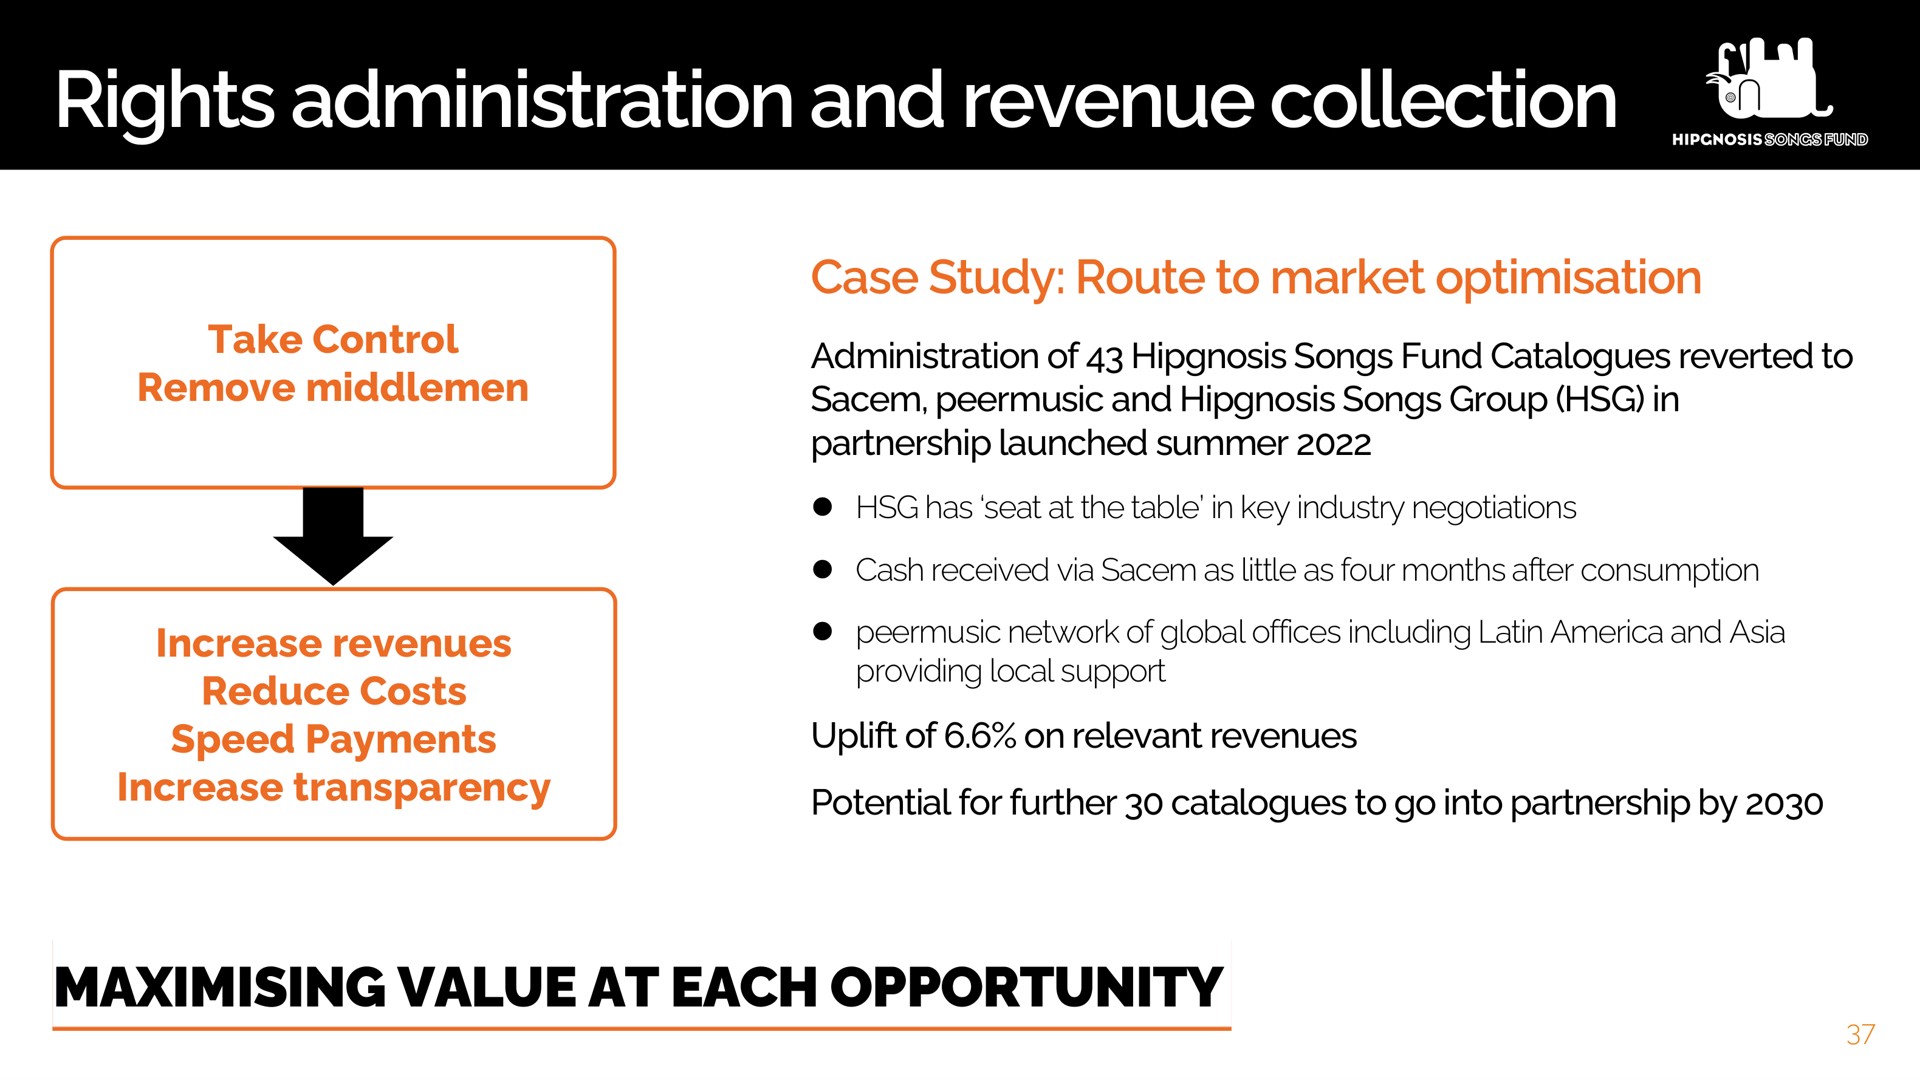 rights administration and revenue collection value at each opportunity | Hipgnosis Songs Fund